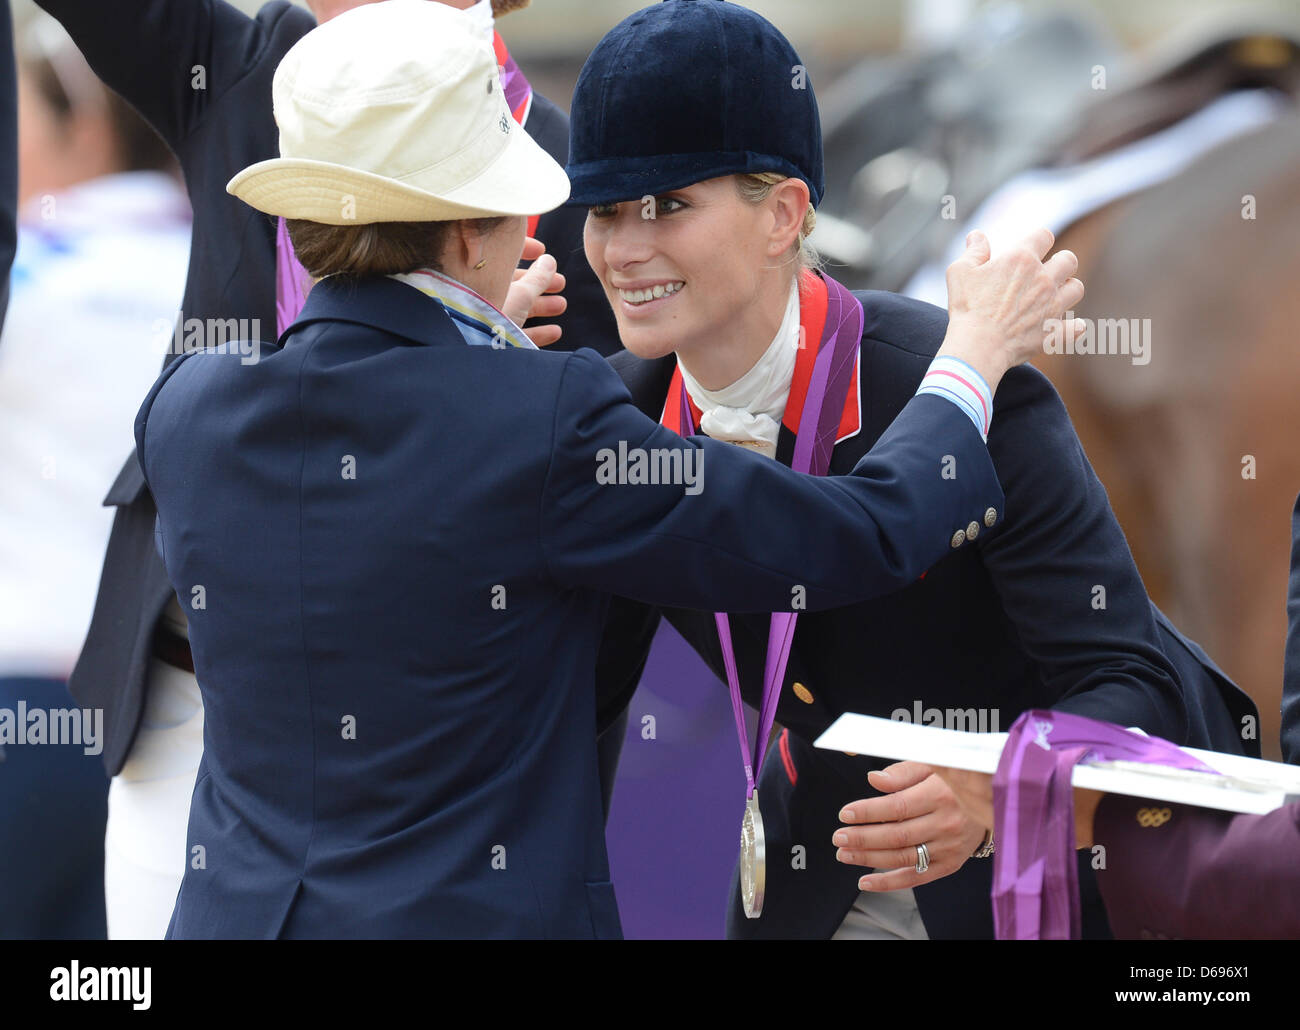 Zara Phillips of Great Britain receives her silver medal form British  Princess Anne (L), Princess Royal after the Equestrian team Eventing during  the London 2012 Olympic Games in Greenwich Park, London, Britain,